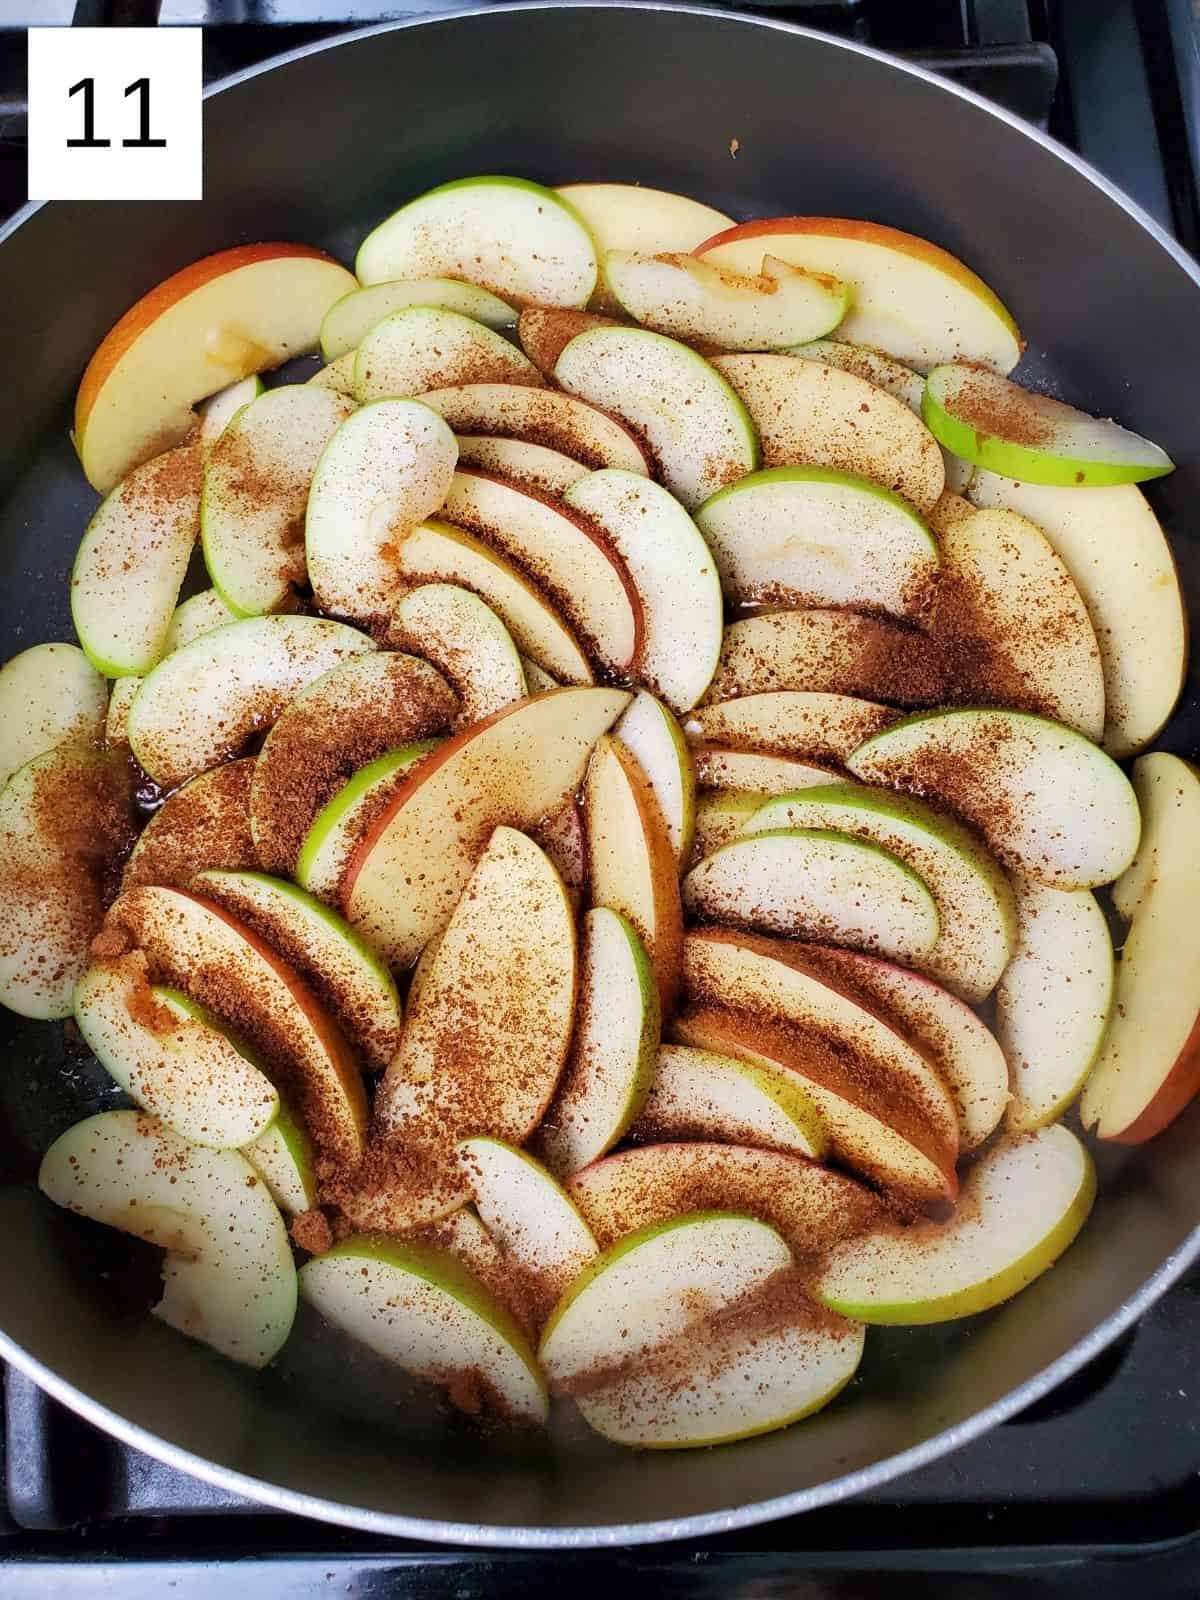 evenly cut slices of apples layered and seasoned with a sugar mixture in a pan.